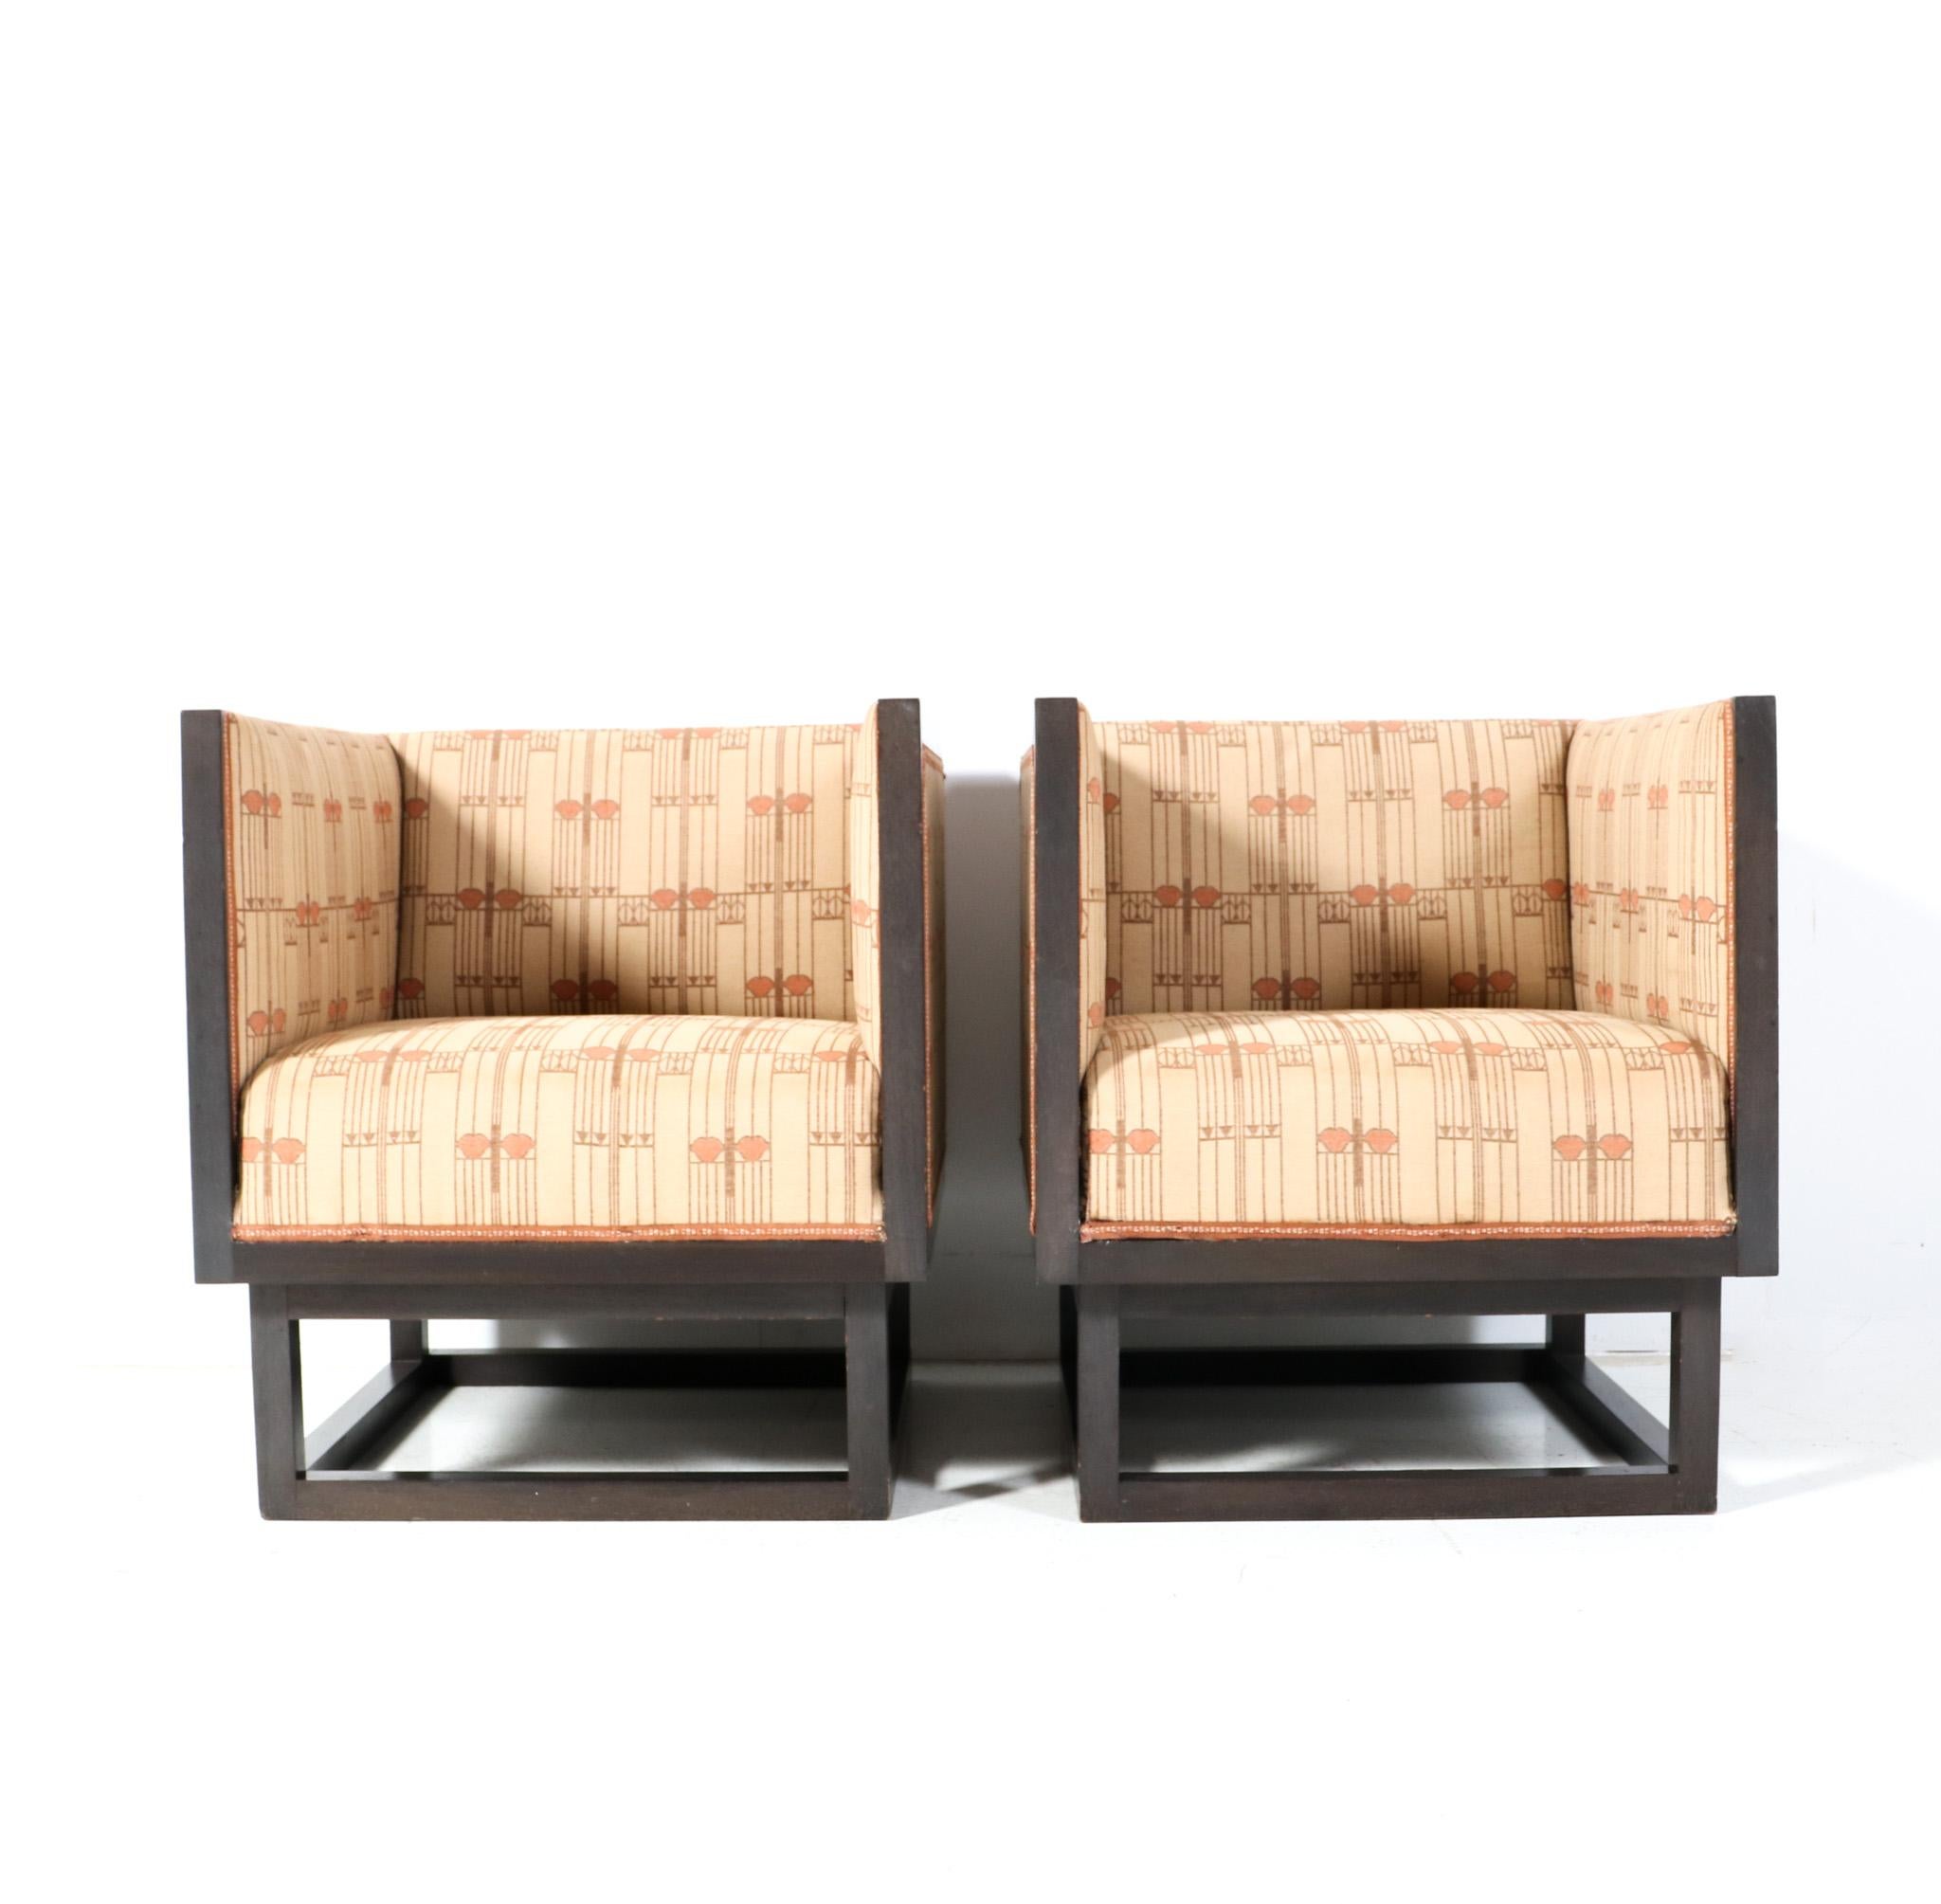 Magnificent and rare pair of Vienna Secession club chairs.
Design by Josef Hoffmann for Wittmann Austria in 1903 and the so-called Cabinet chairs were originally designed for the home of Dr. Salzer in Vienna.
This pair of Cabinet chairs dates from